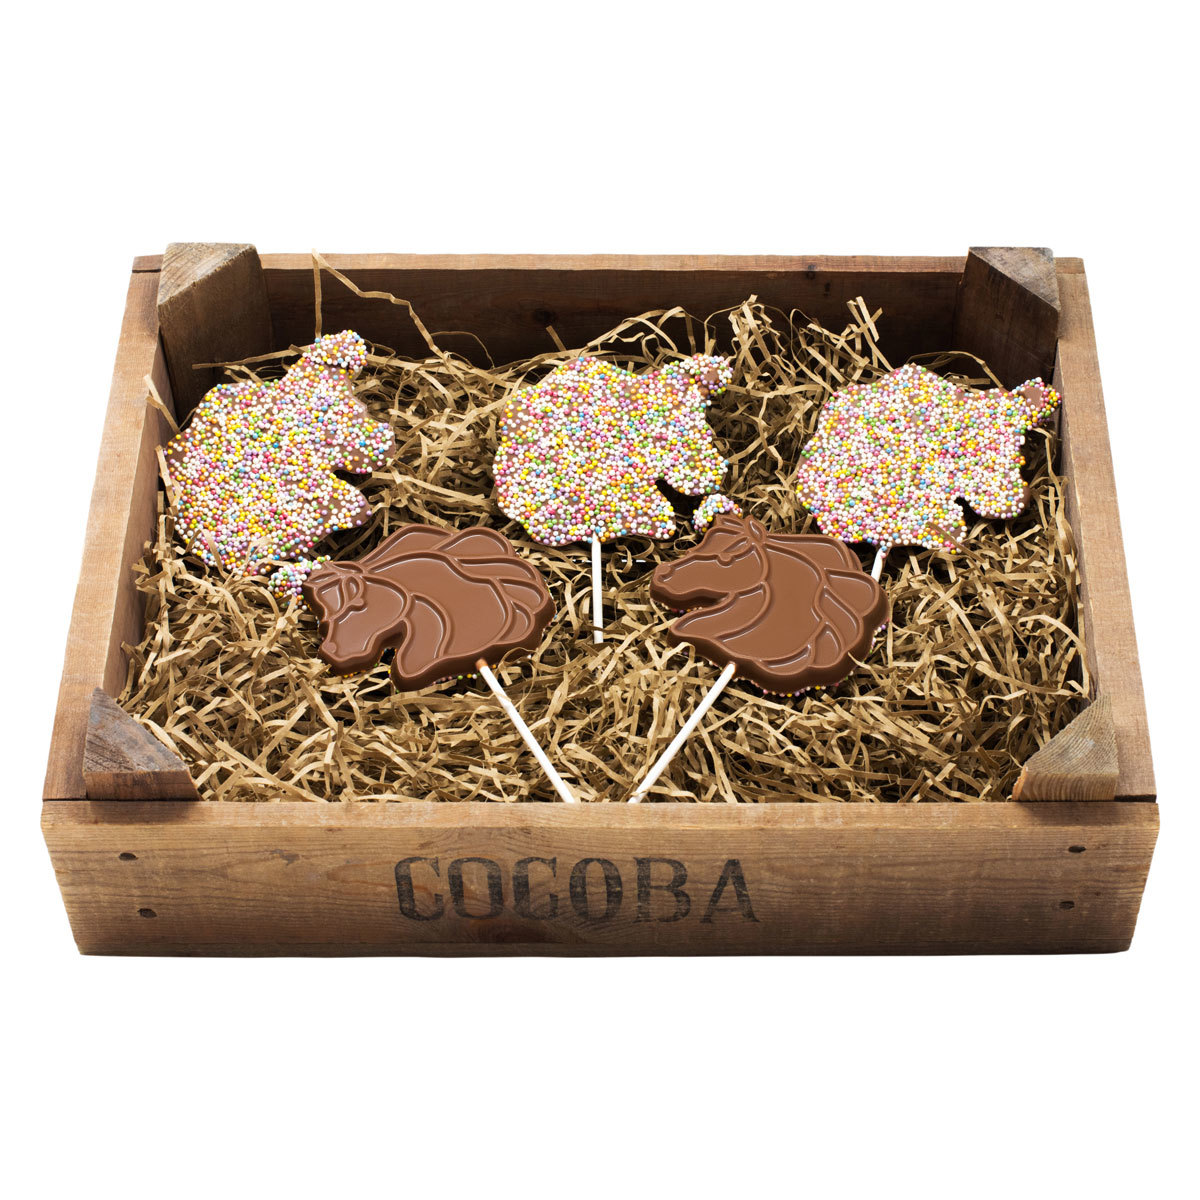 Choc Lollipops in wooden crate with tissue paper